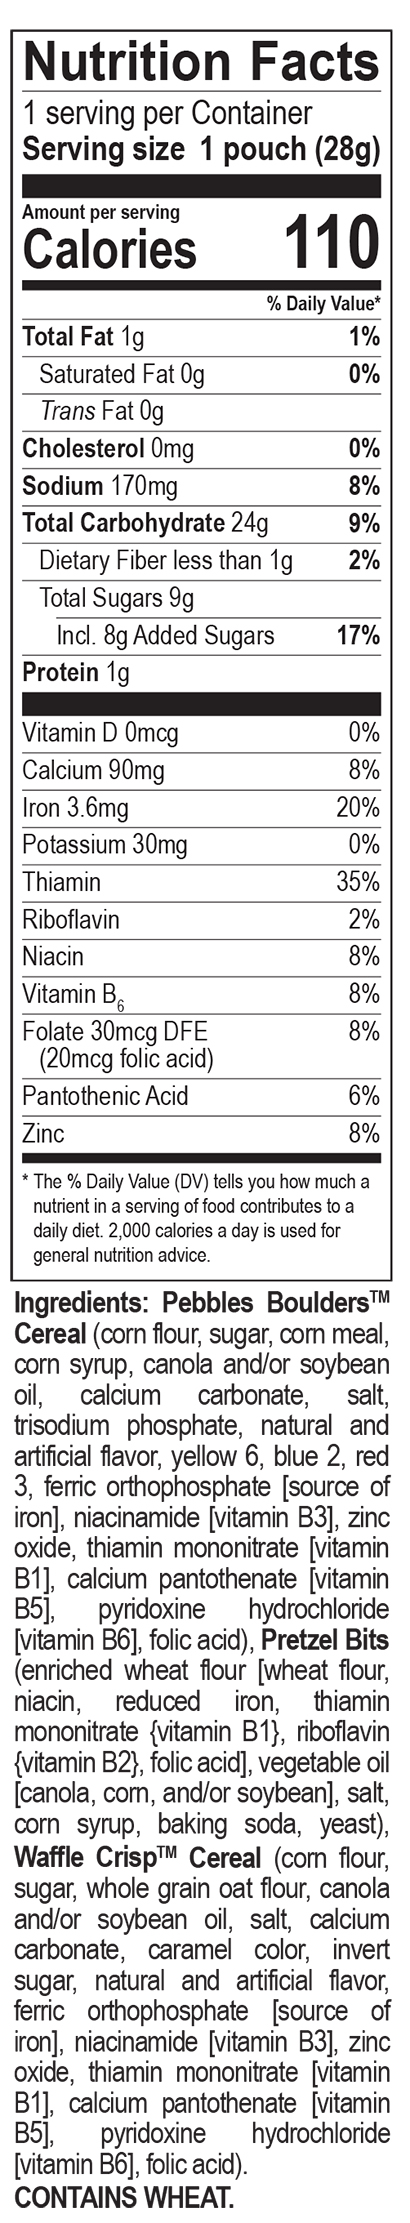 PEBBLES Shake Ups Sweet and Salty Nutrition Facts Panel